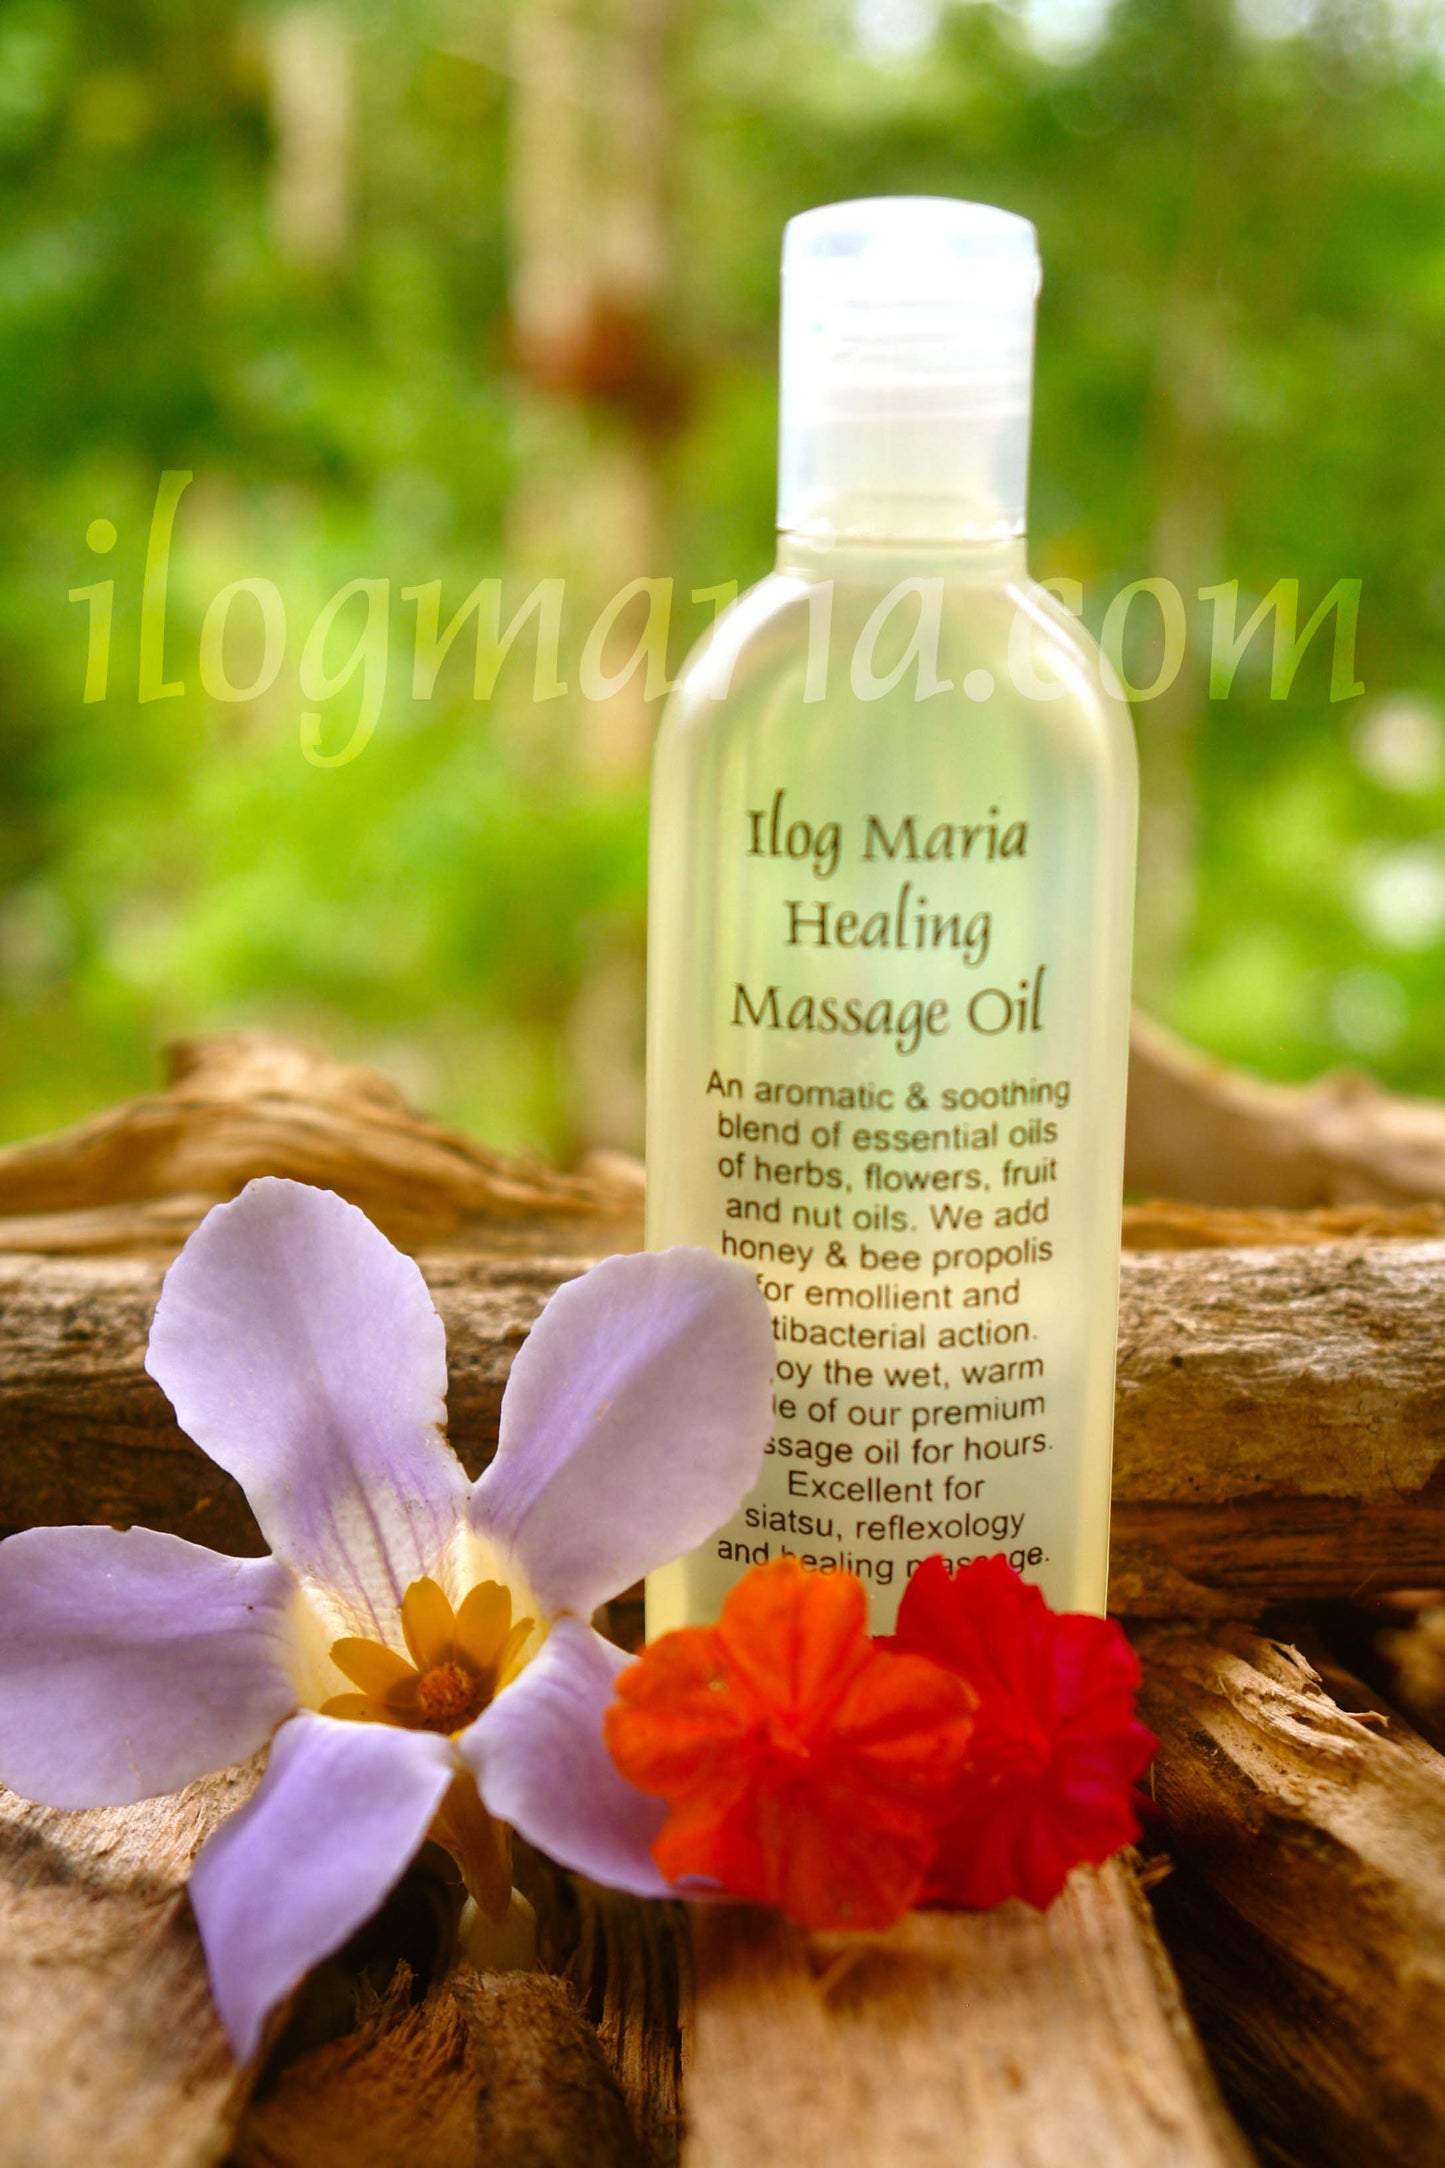 Ilog Maria Healing Massage Oil In Floral